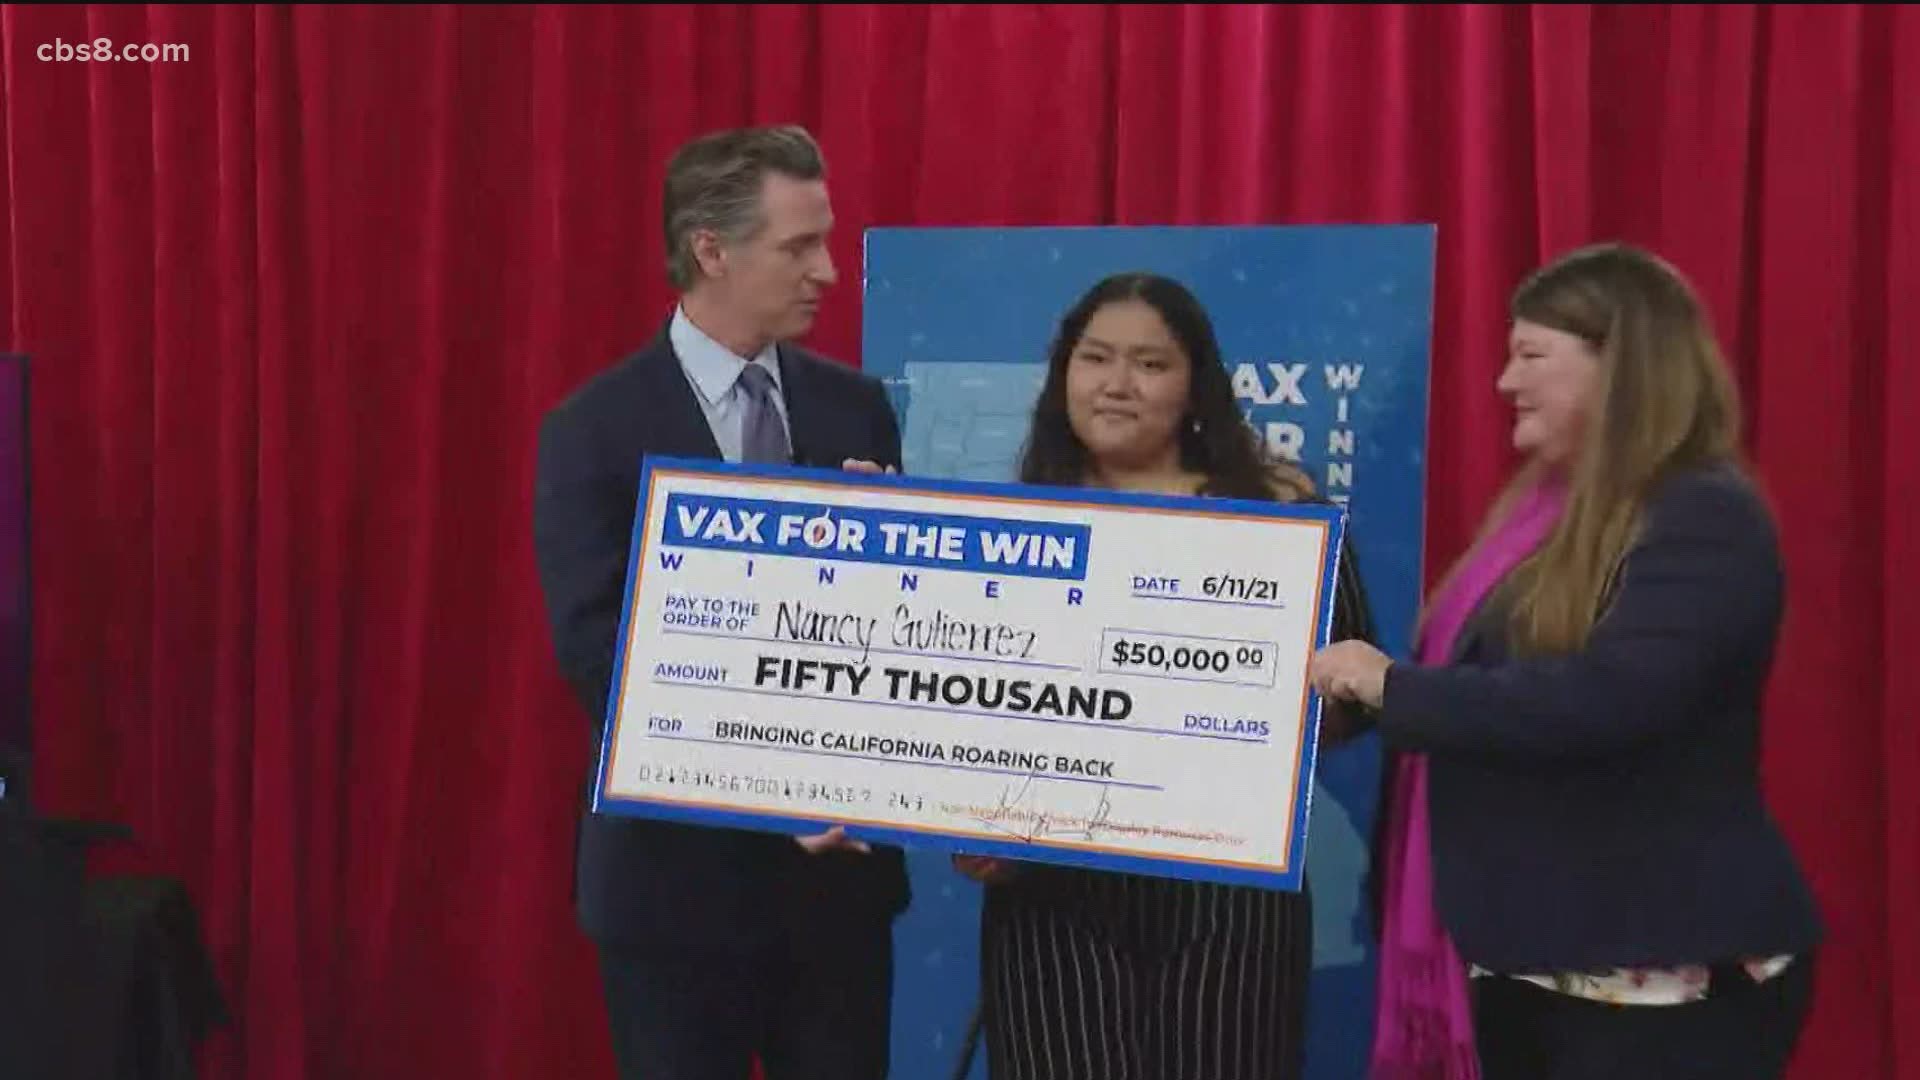 At the event in Vista, Newsom presented a ceremonial $50,000 check to one of the winners from last week's drawing, 17-year-old Nancy Gutierrez.